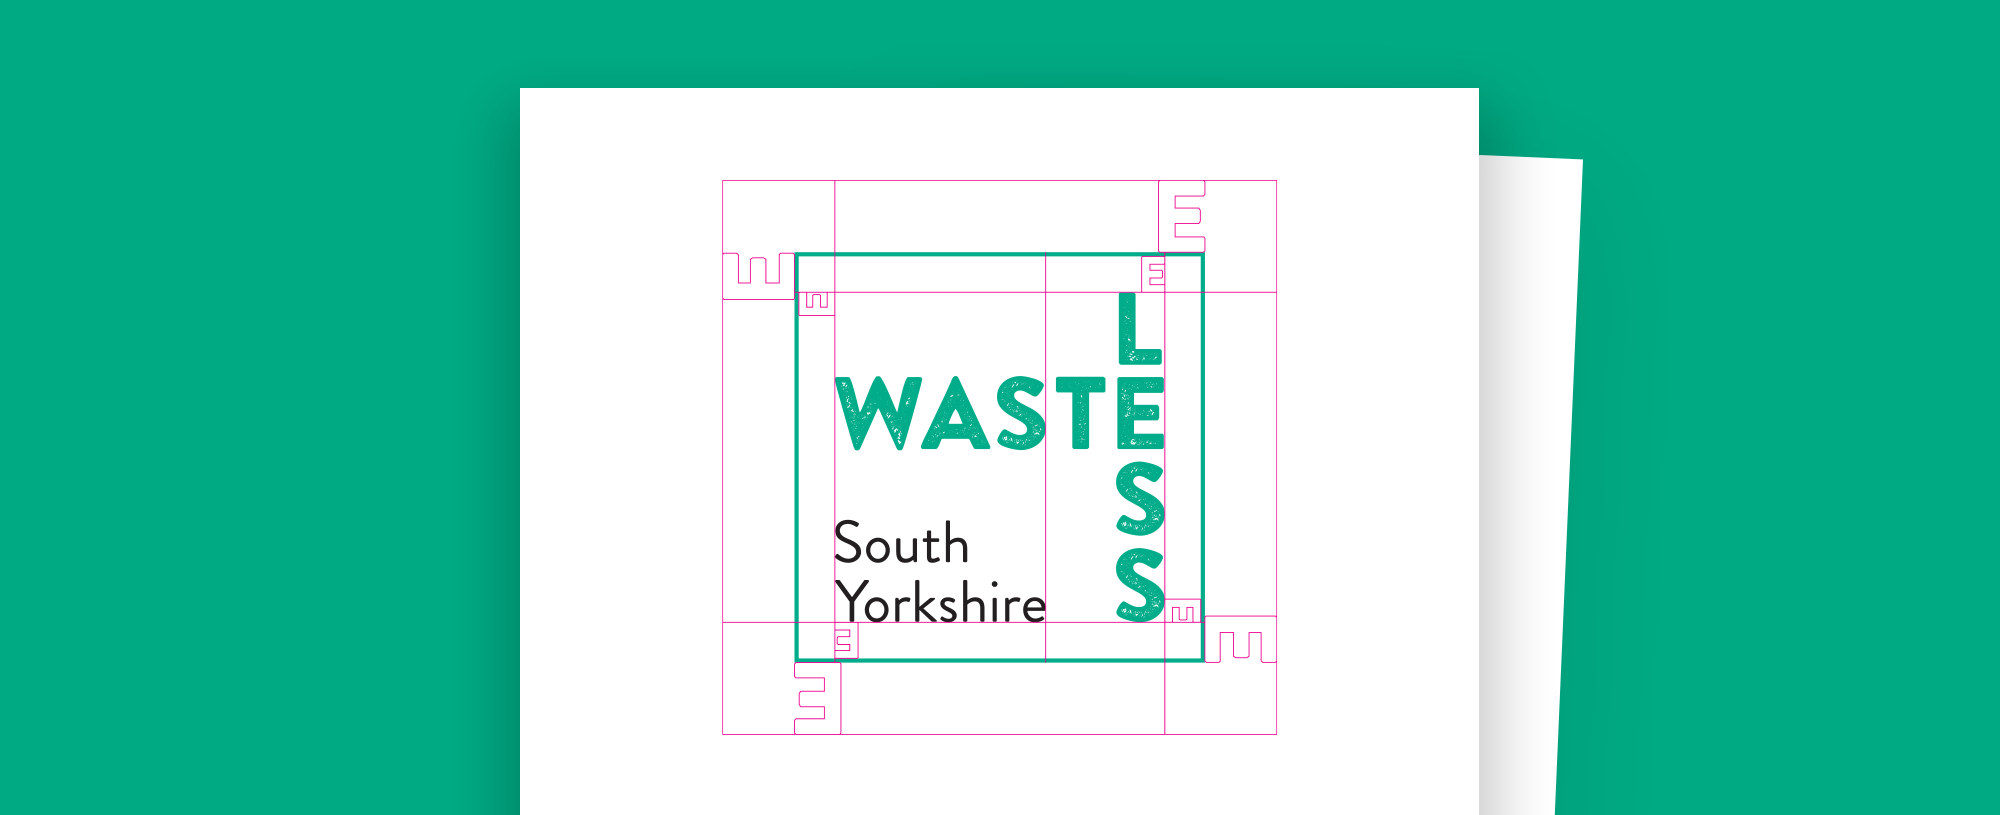 Branding for campaign to reduce waste across South Yorkshire